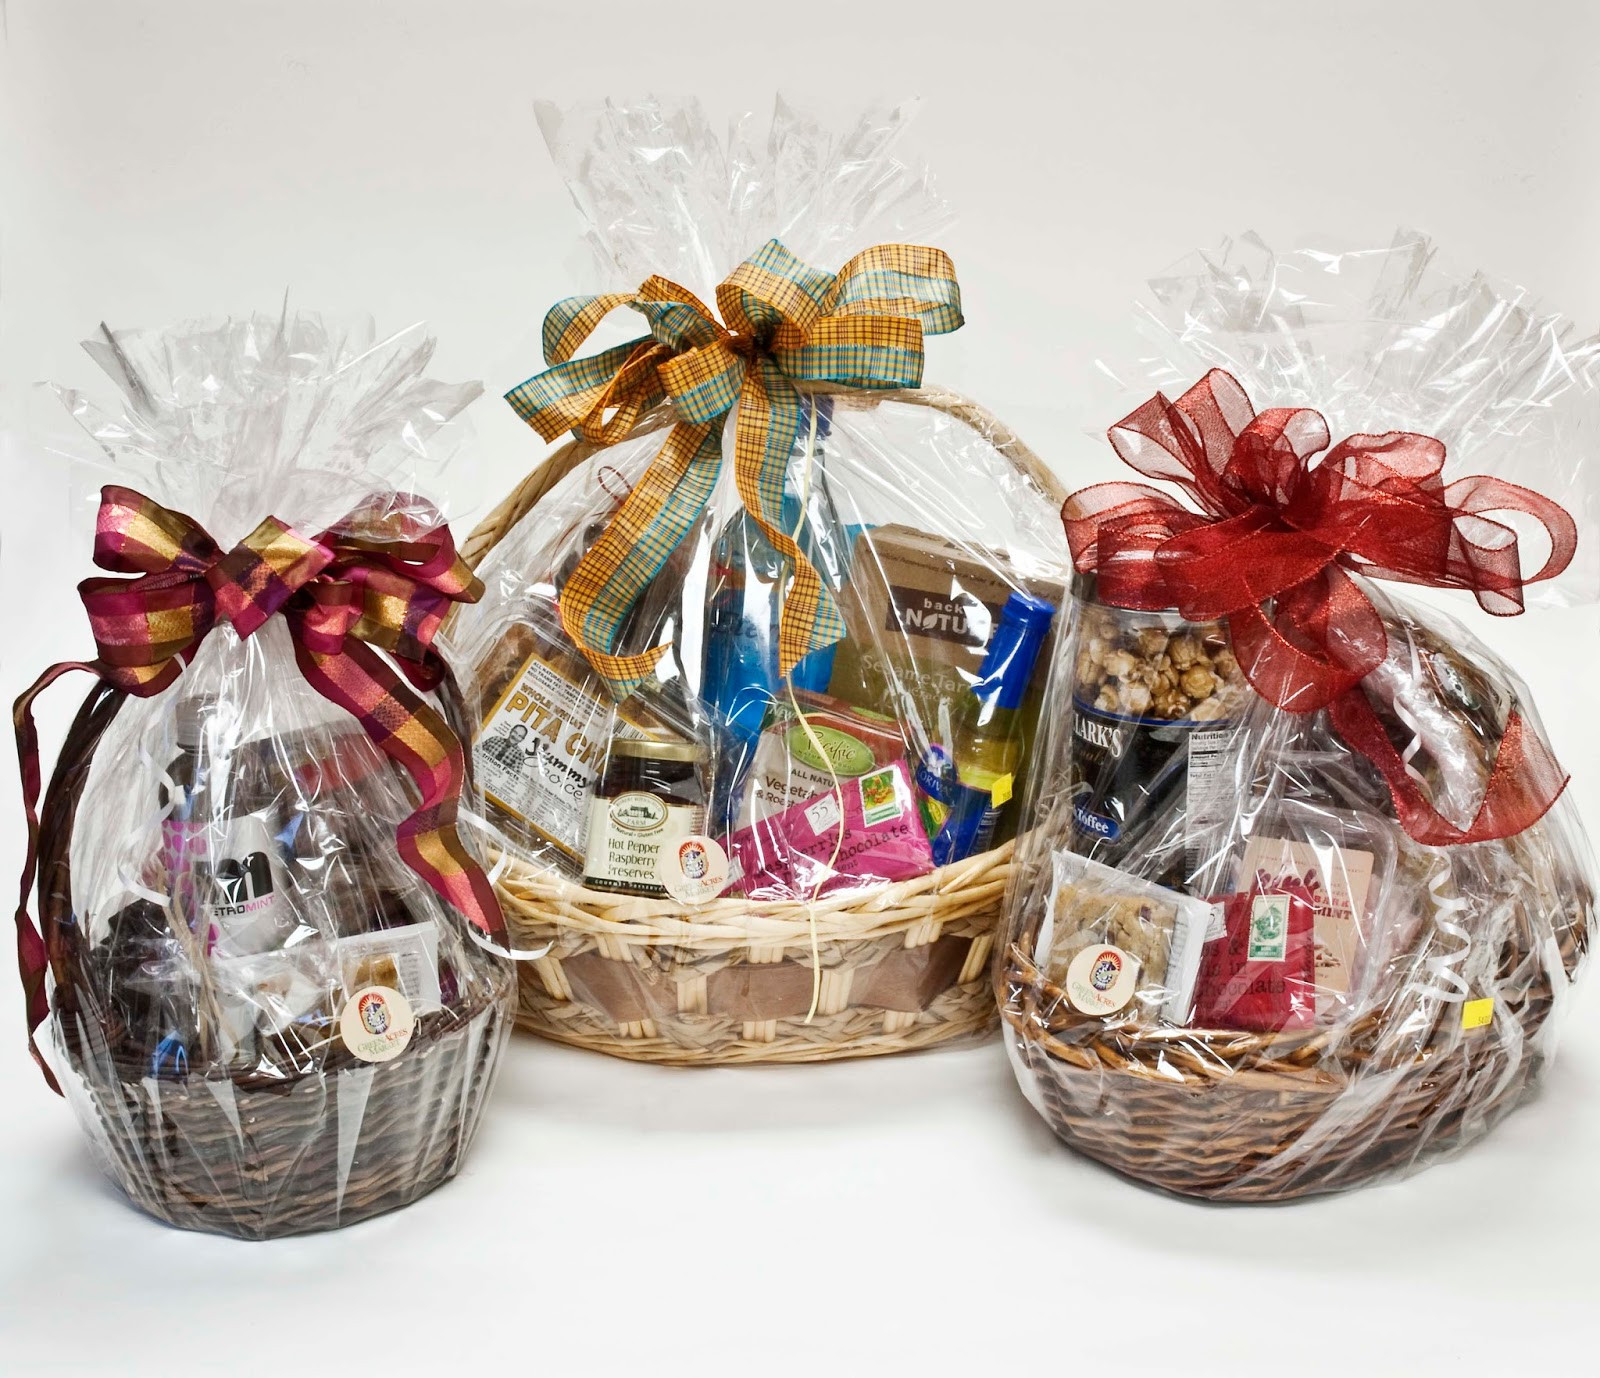 Small Gift Basket Ideas
 Gift Basket Business How to Start a Gift Basket Business